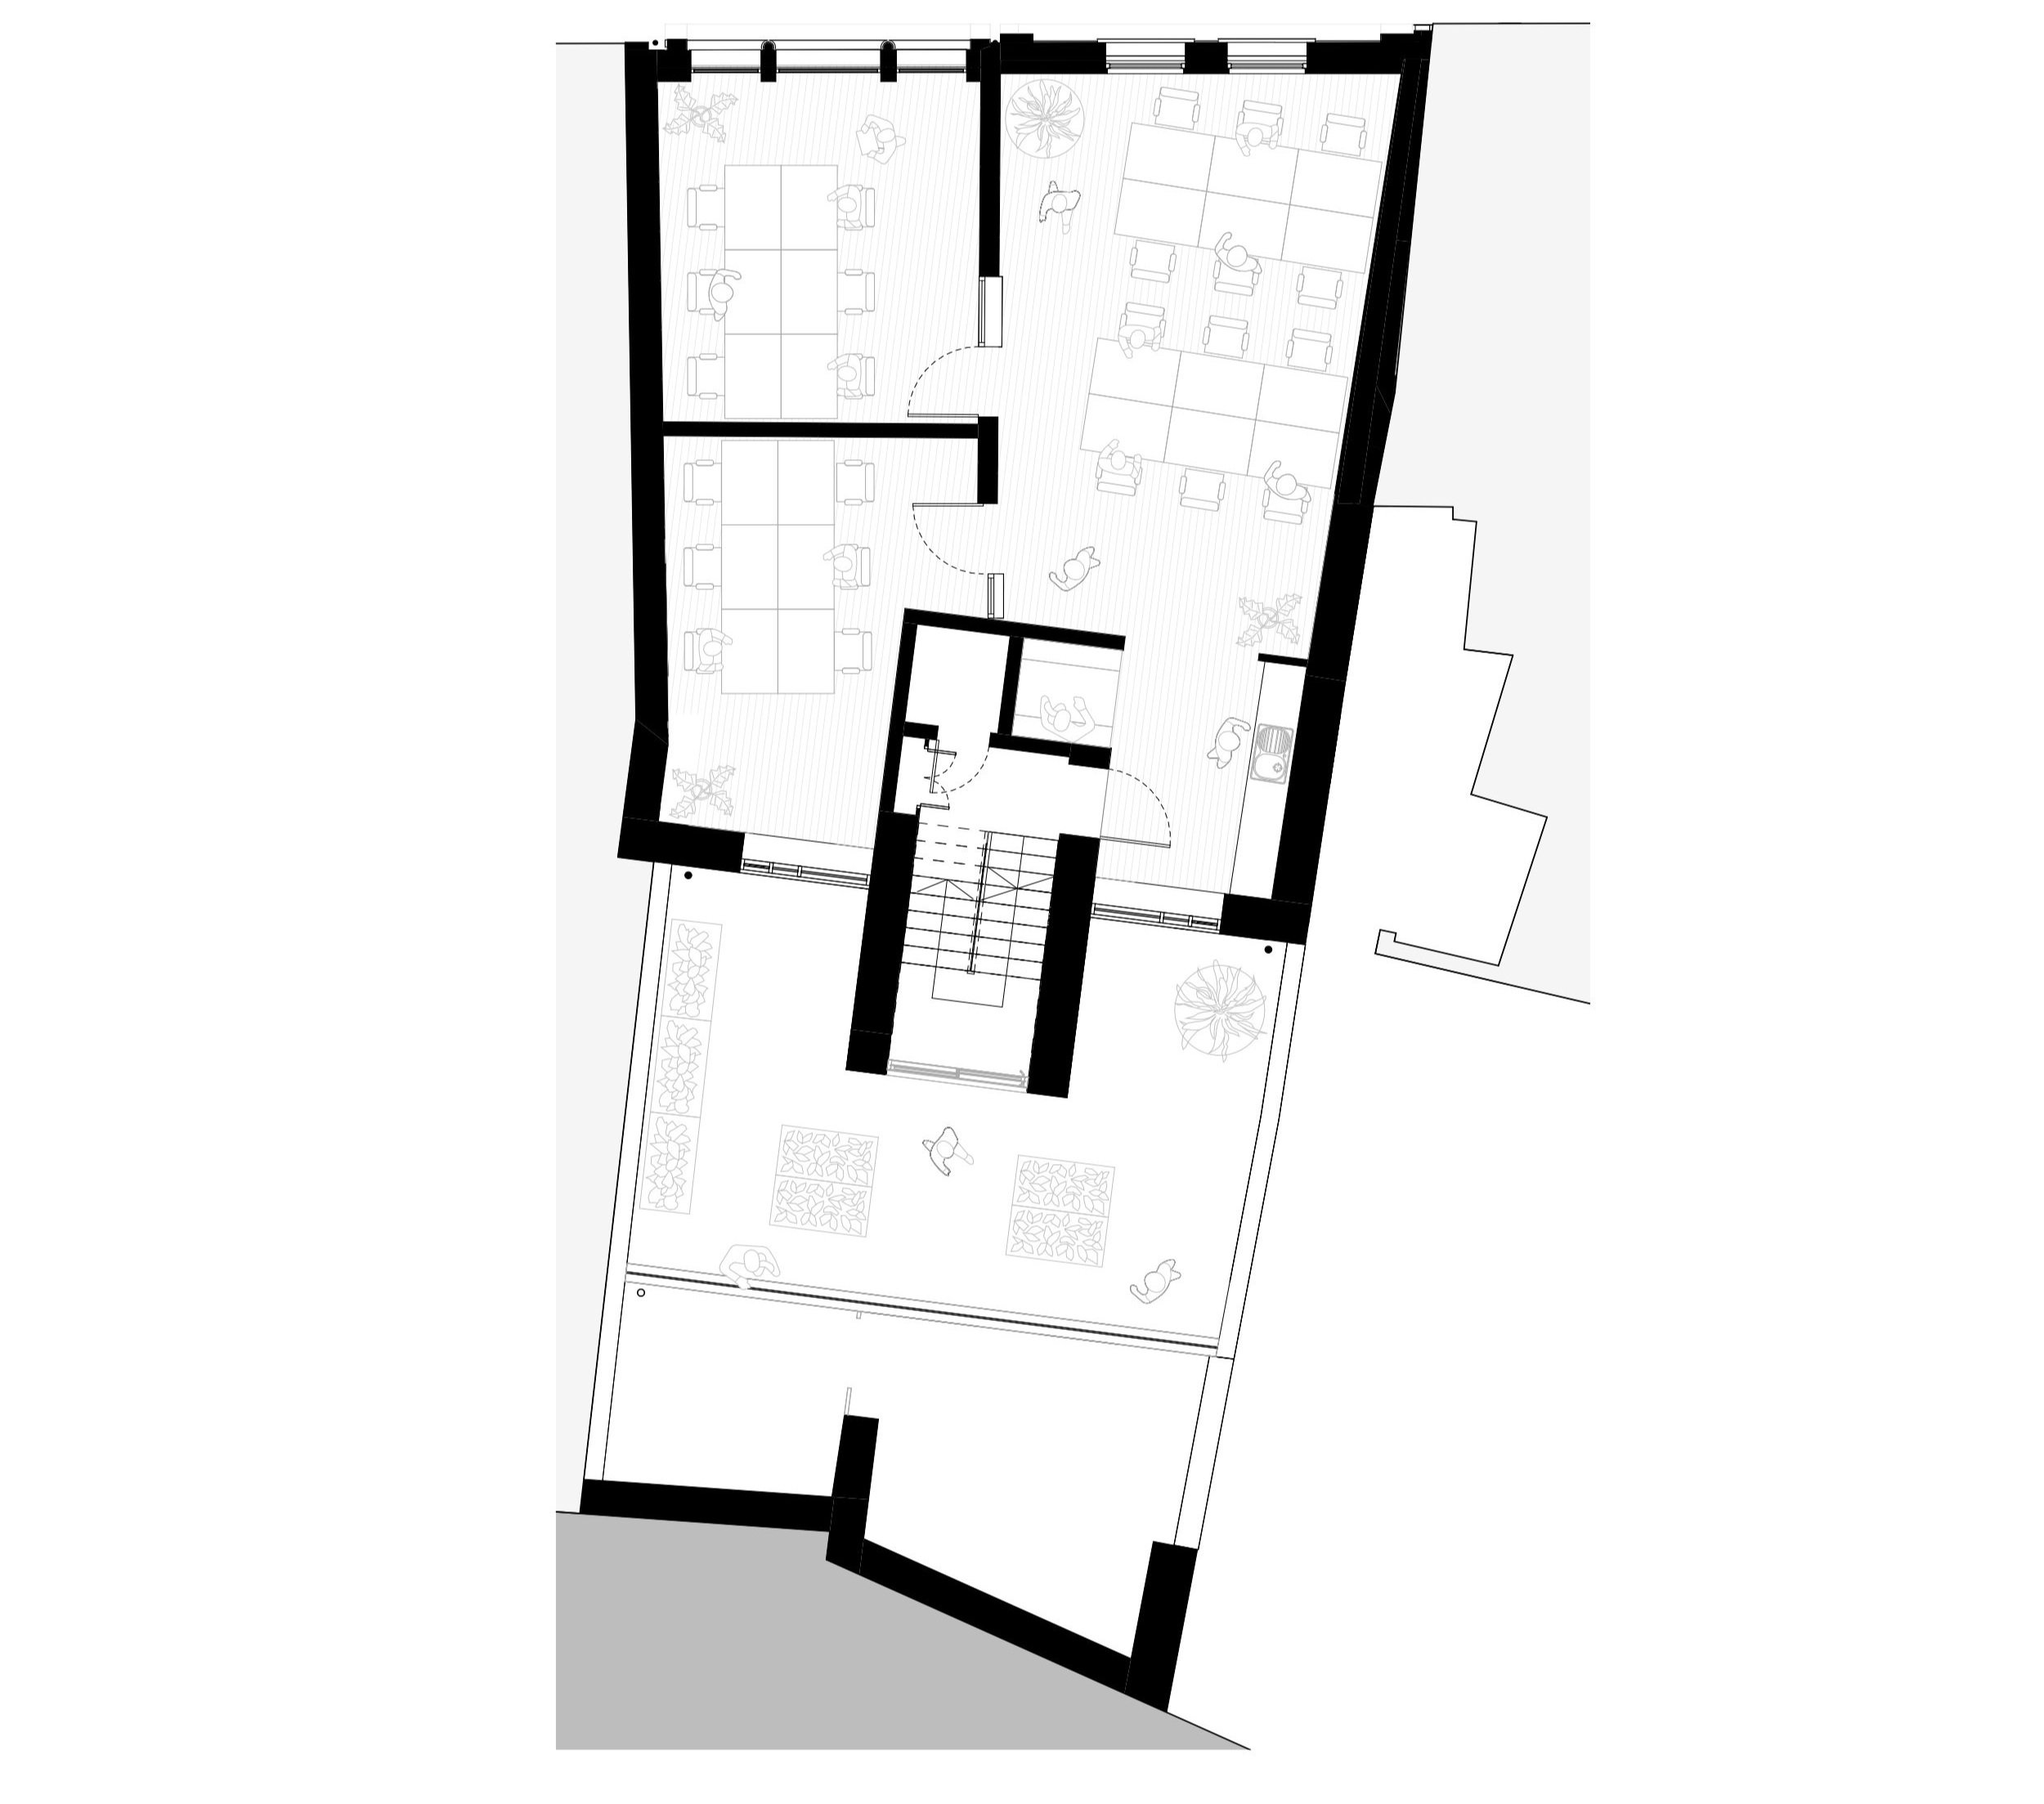 Proposed first floor